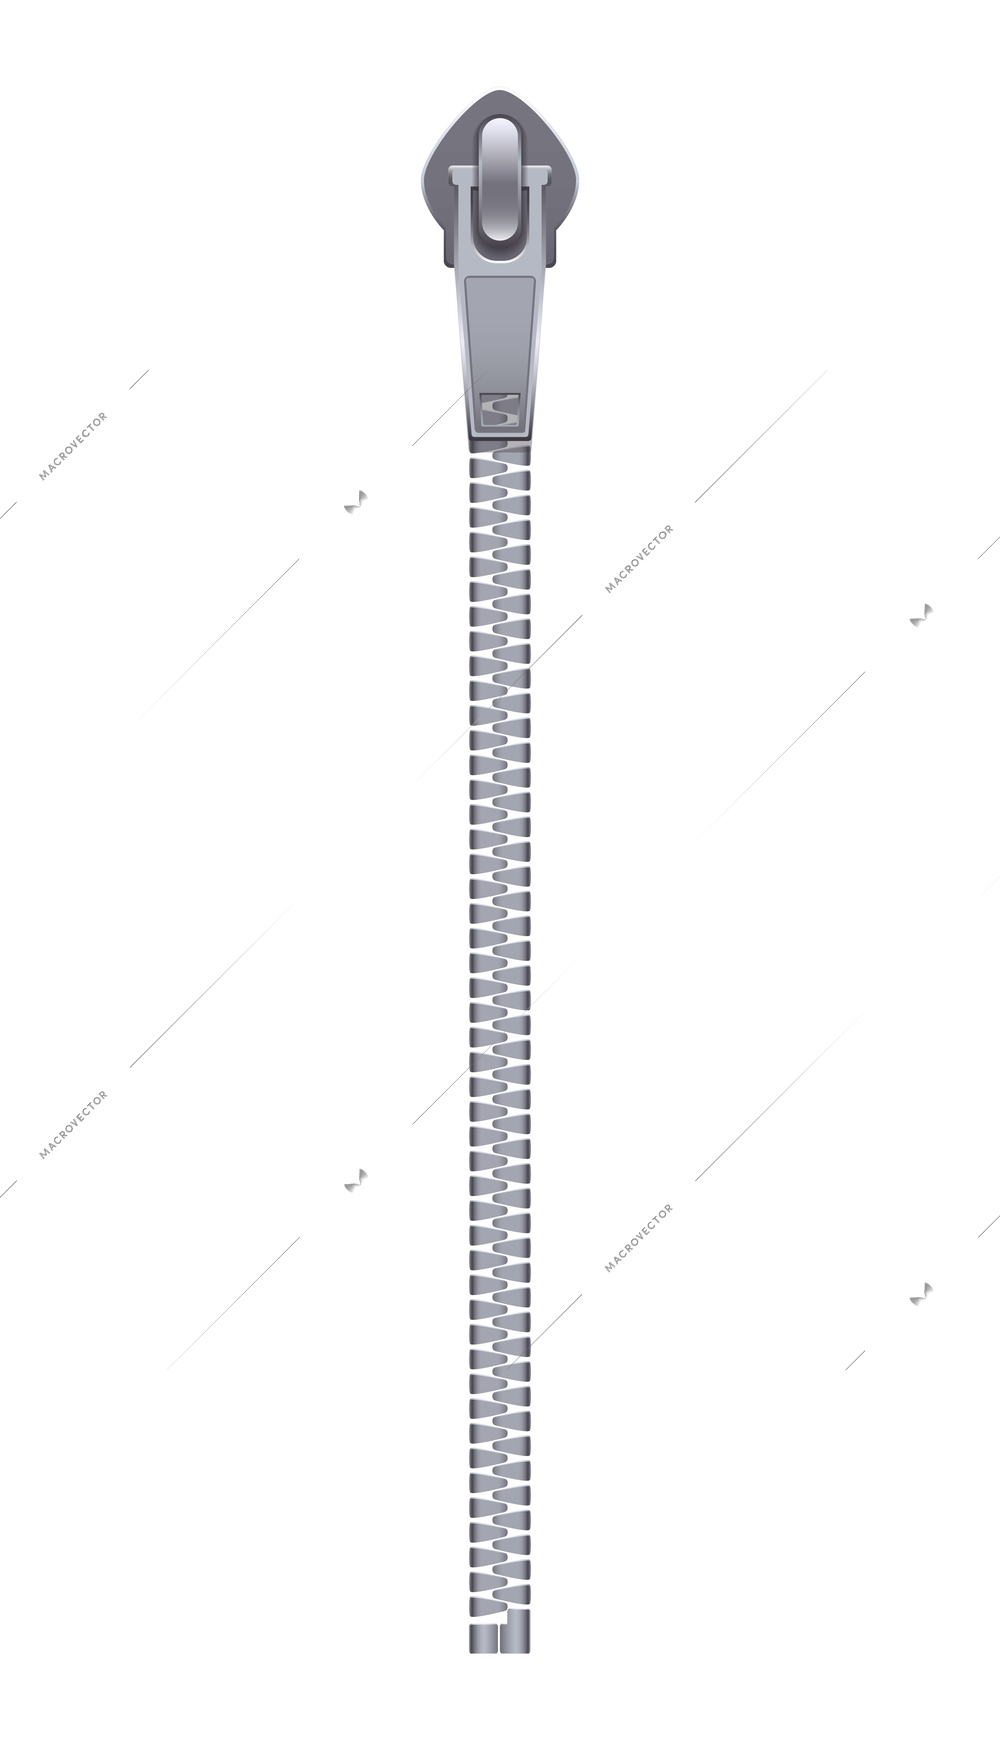 Zipper realistic composition with isolated image of silver fastener with zip slider vector illustration